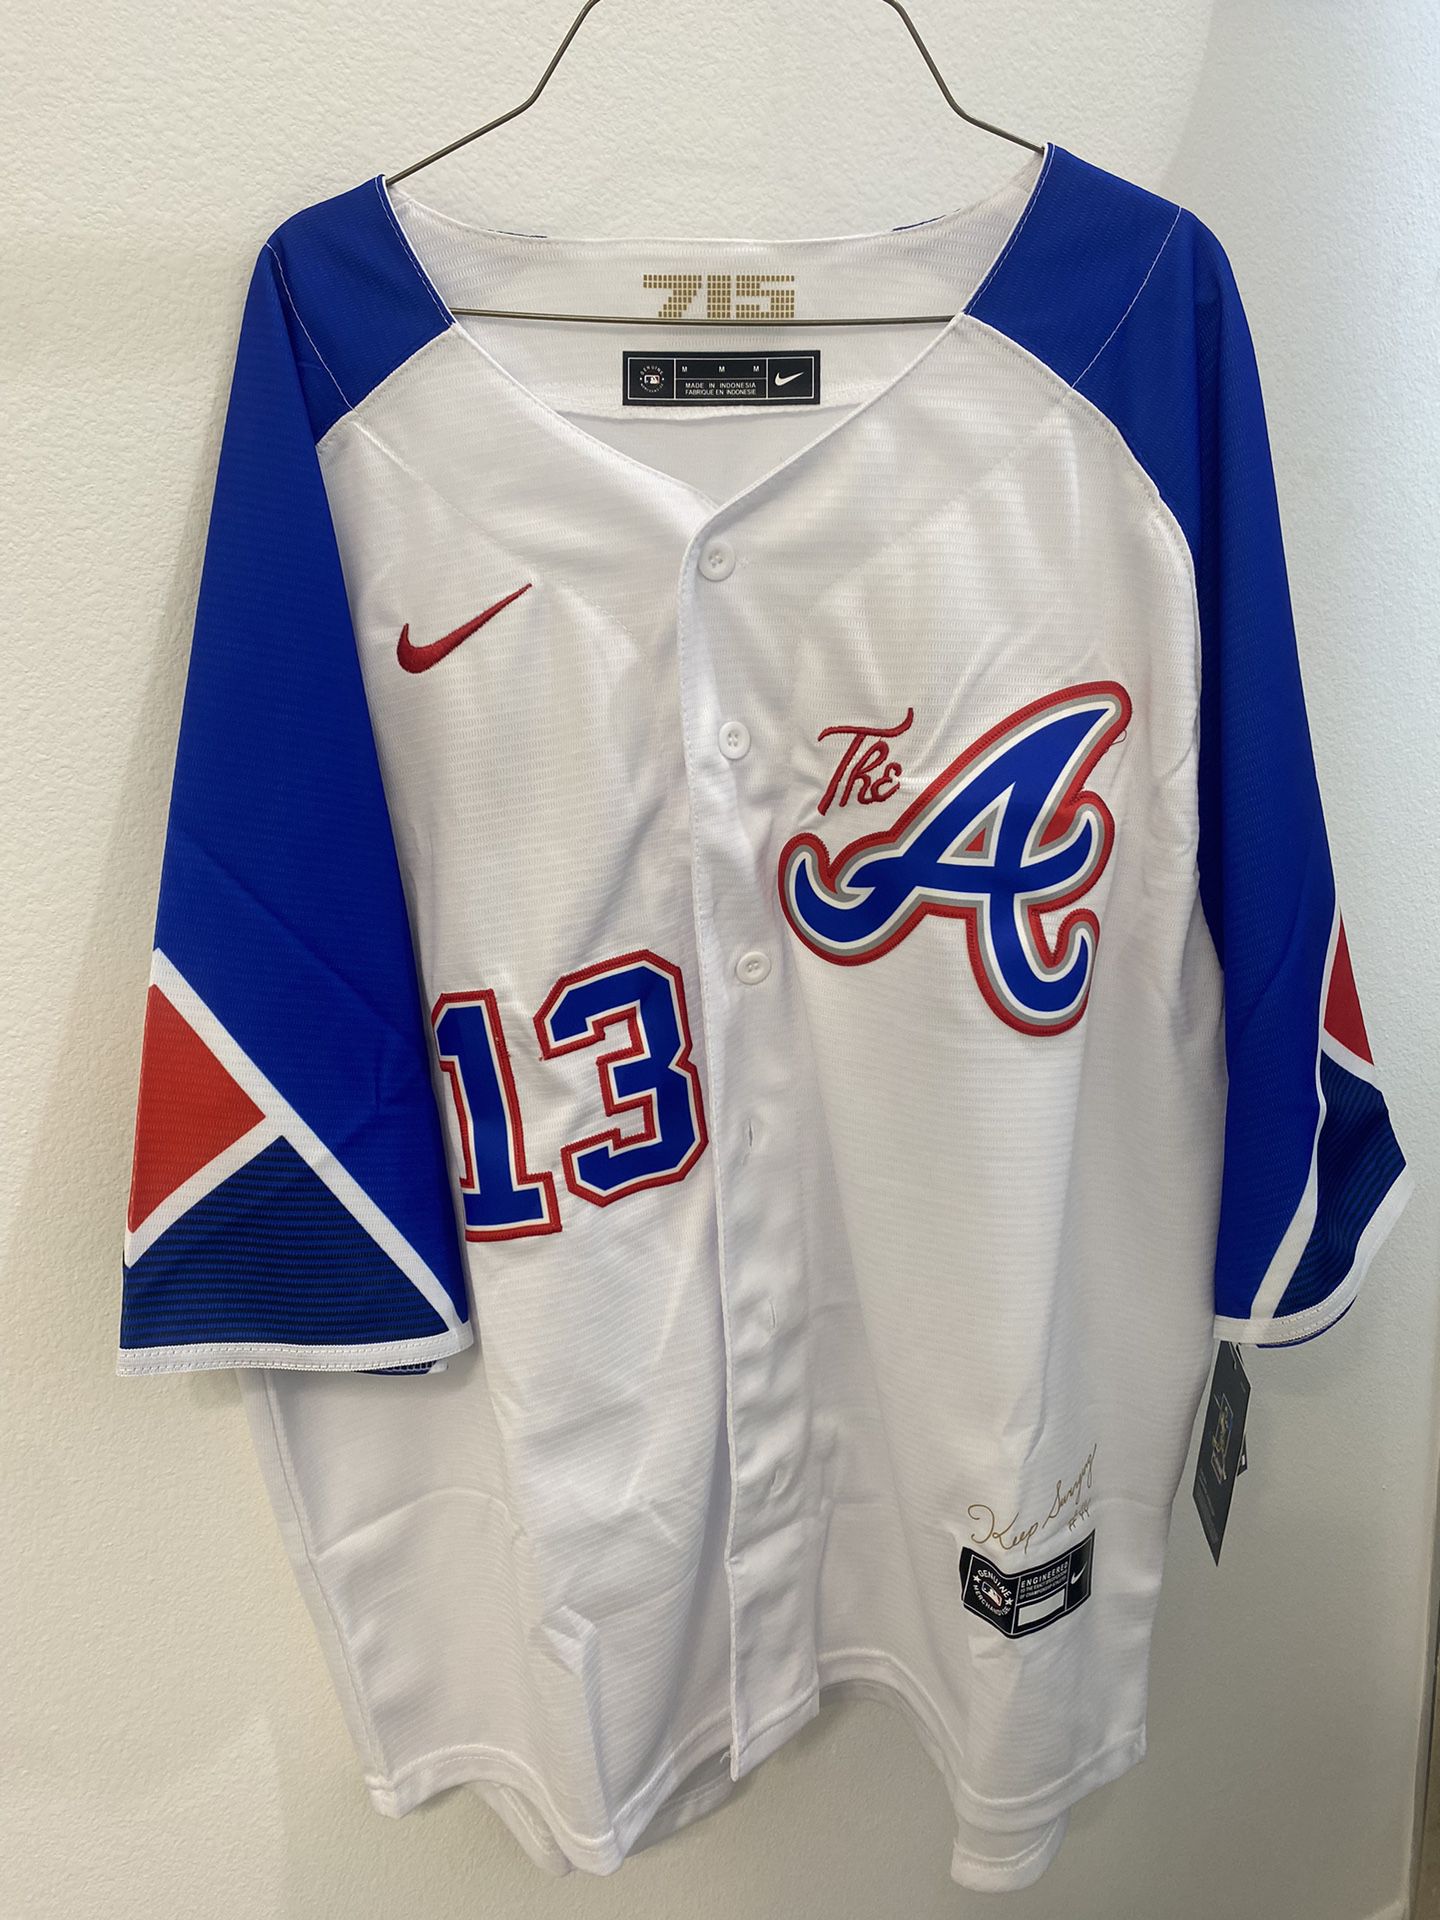 Authentic Nike Ronald Acuna Braves Jersey “The A” Edition for Sale in Port  St. Lucie, FL - OfferUp